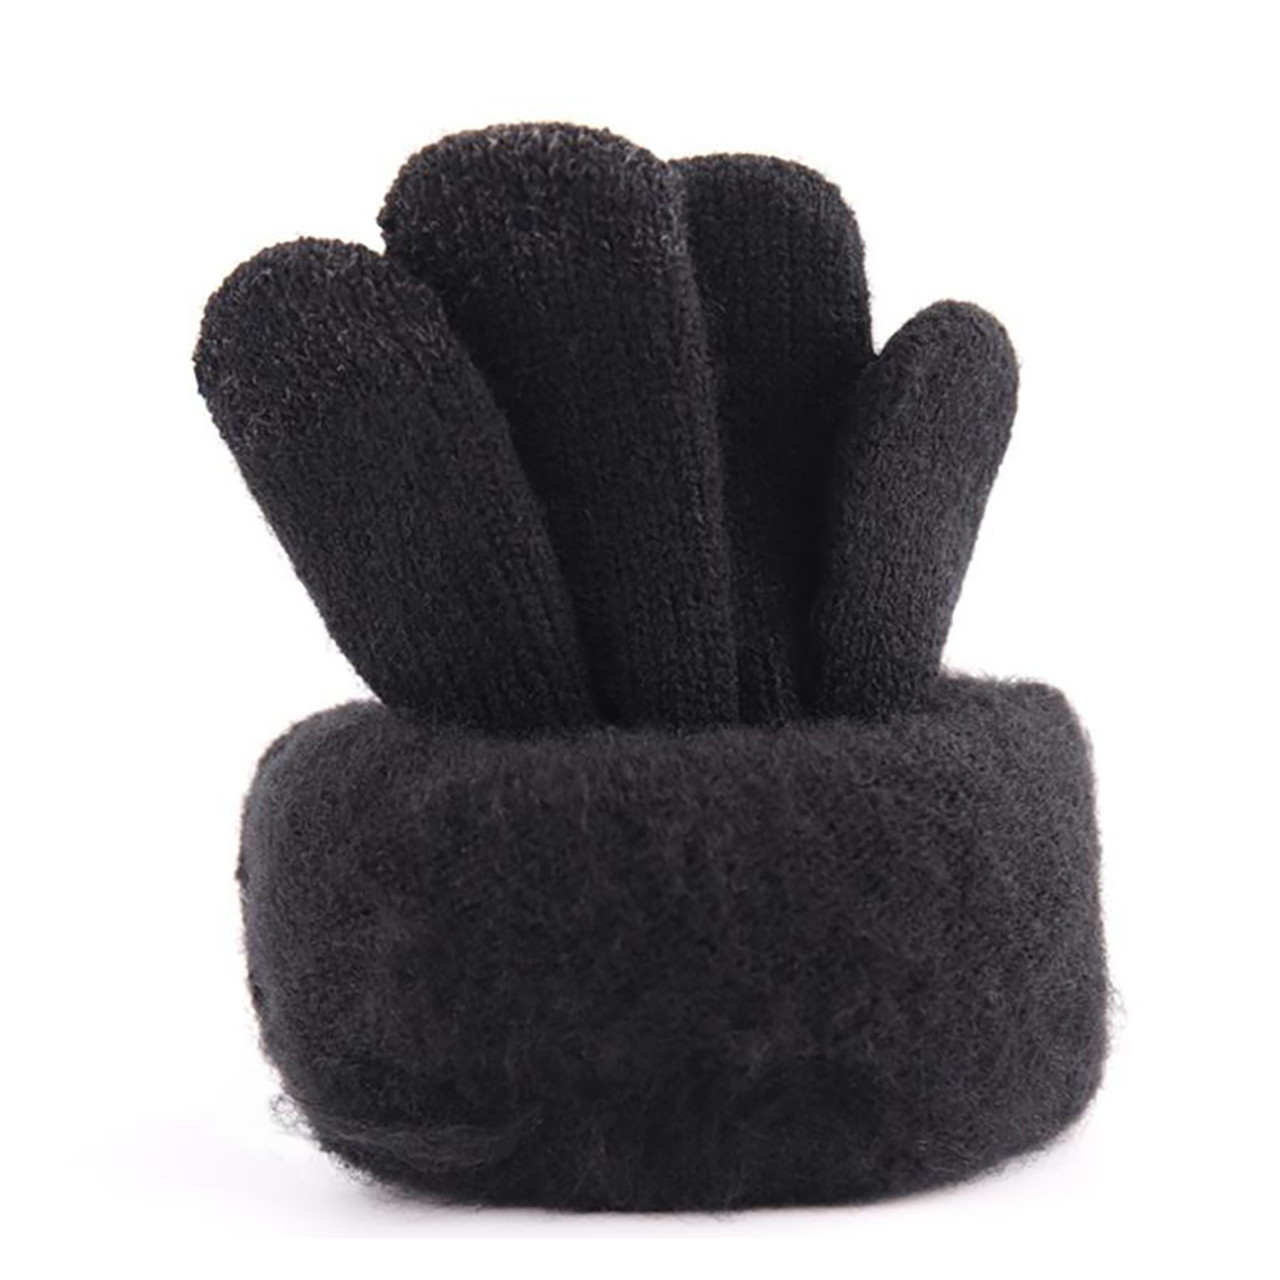 Three-Finger Touchscreen Gloves with Silicone Nonslip Palm Grip product image